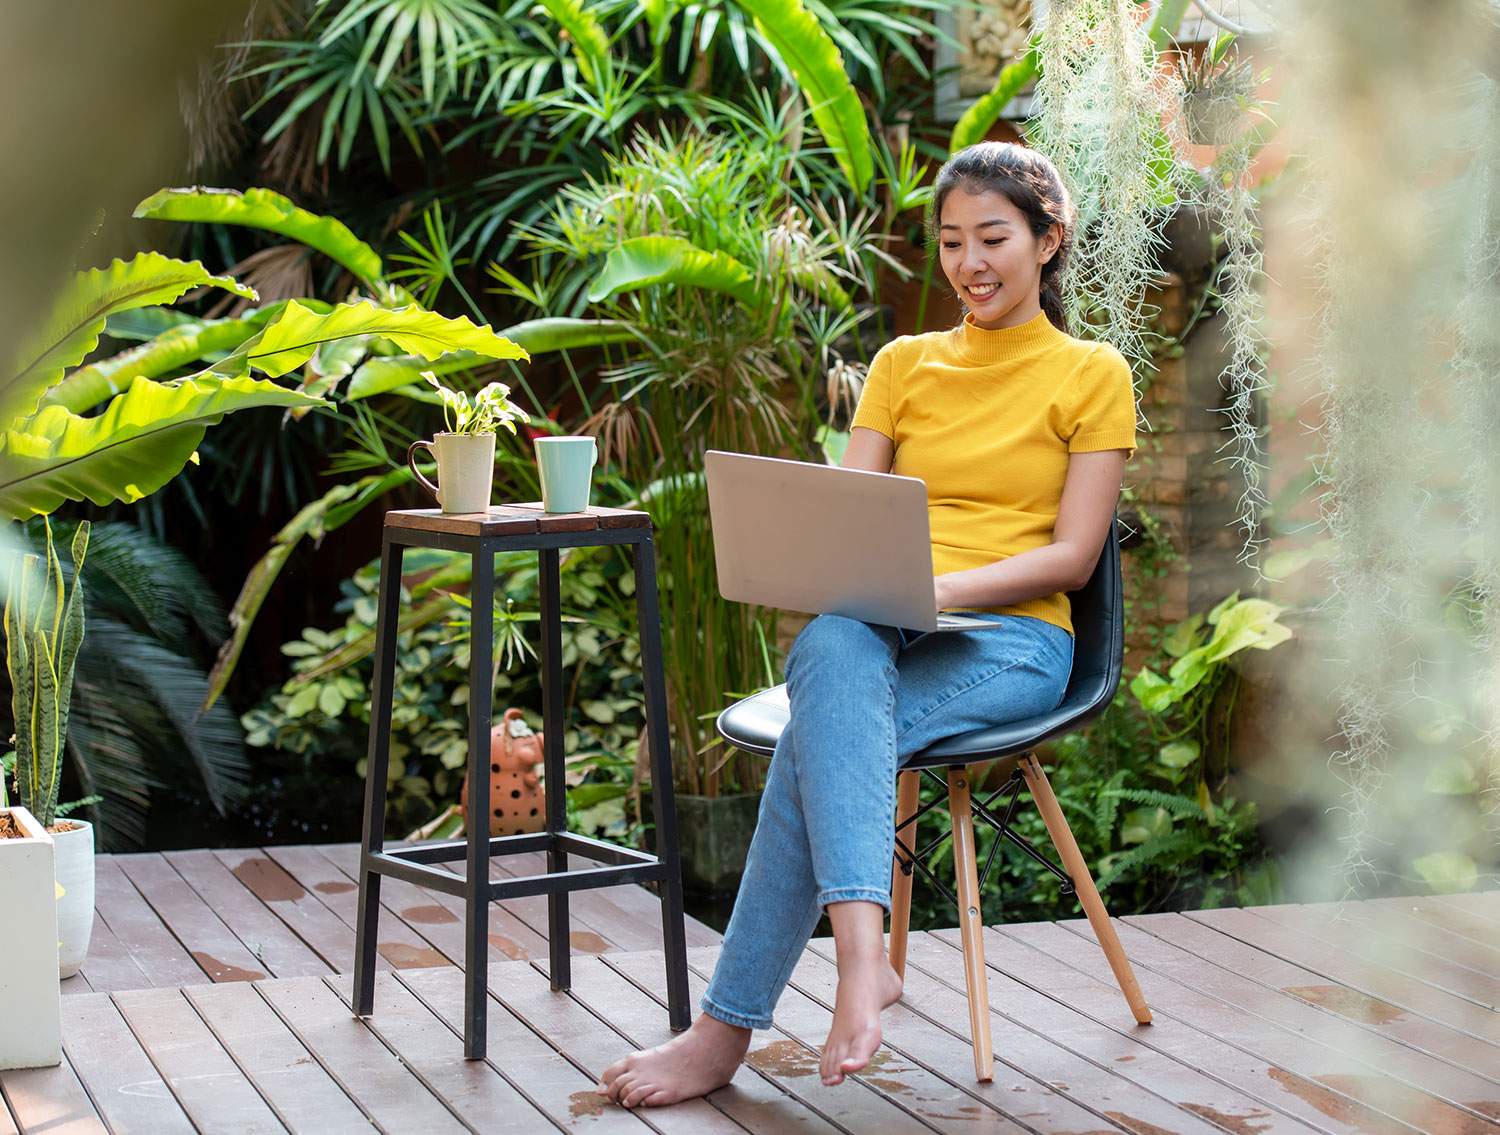 Woman smiling and working laptop in a garden - learn how to travel and work remotely